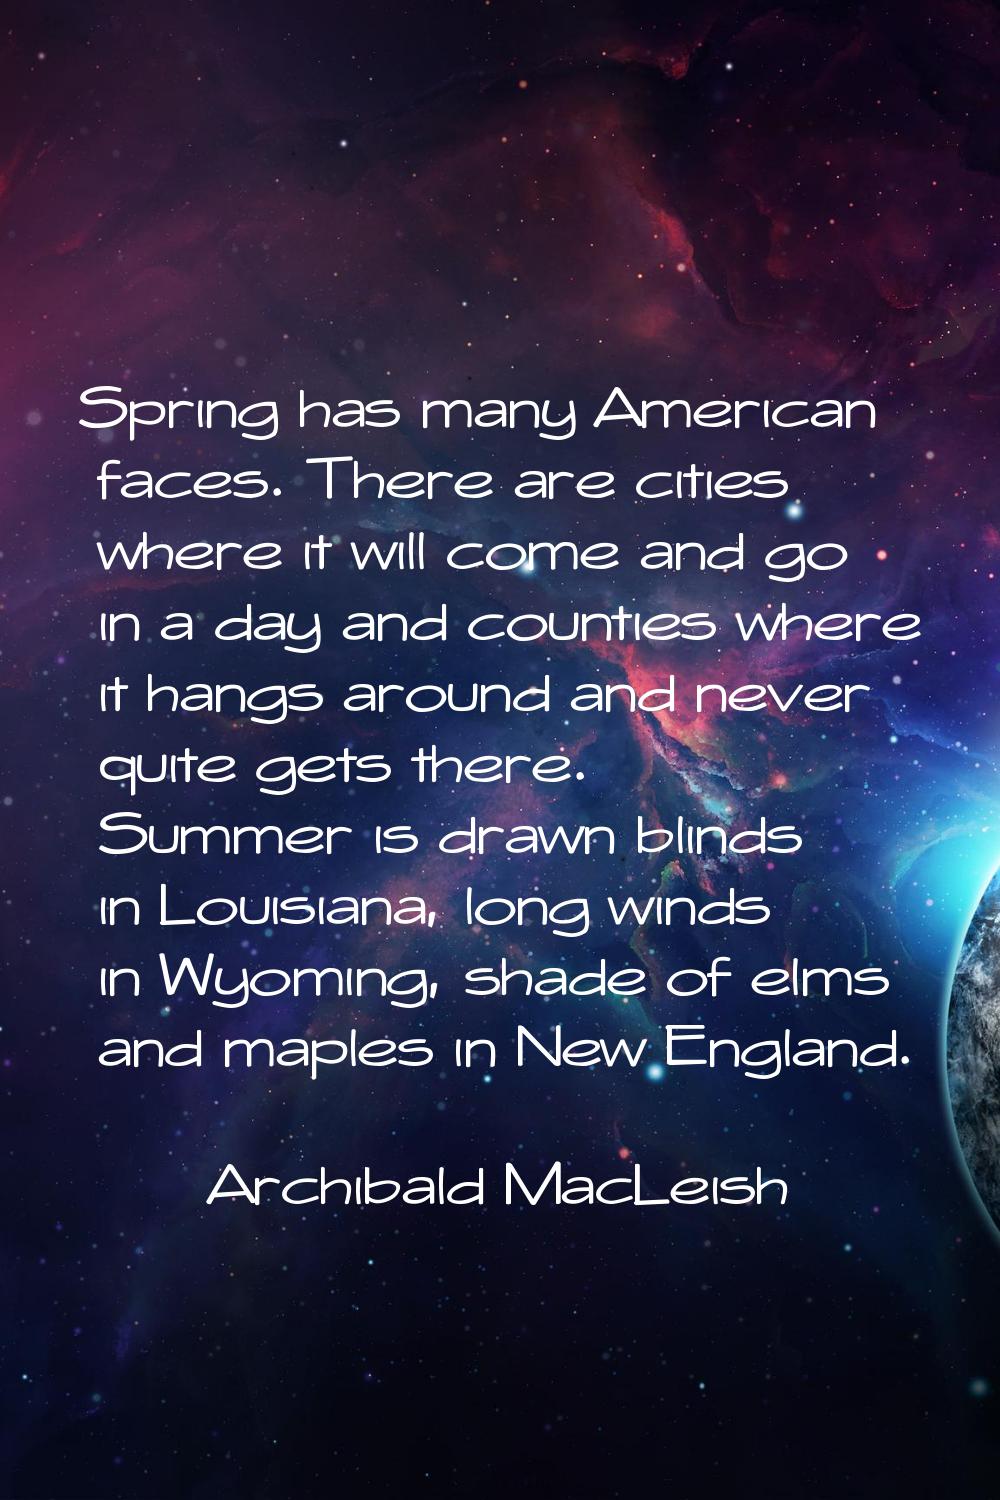 Spring has many American faces. There are cities where it will come and go in a day and counties wh